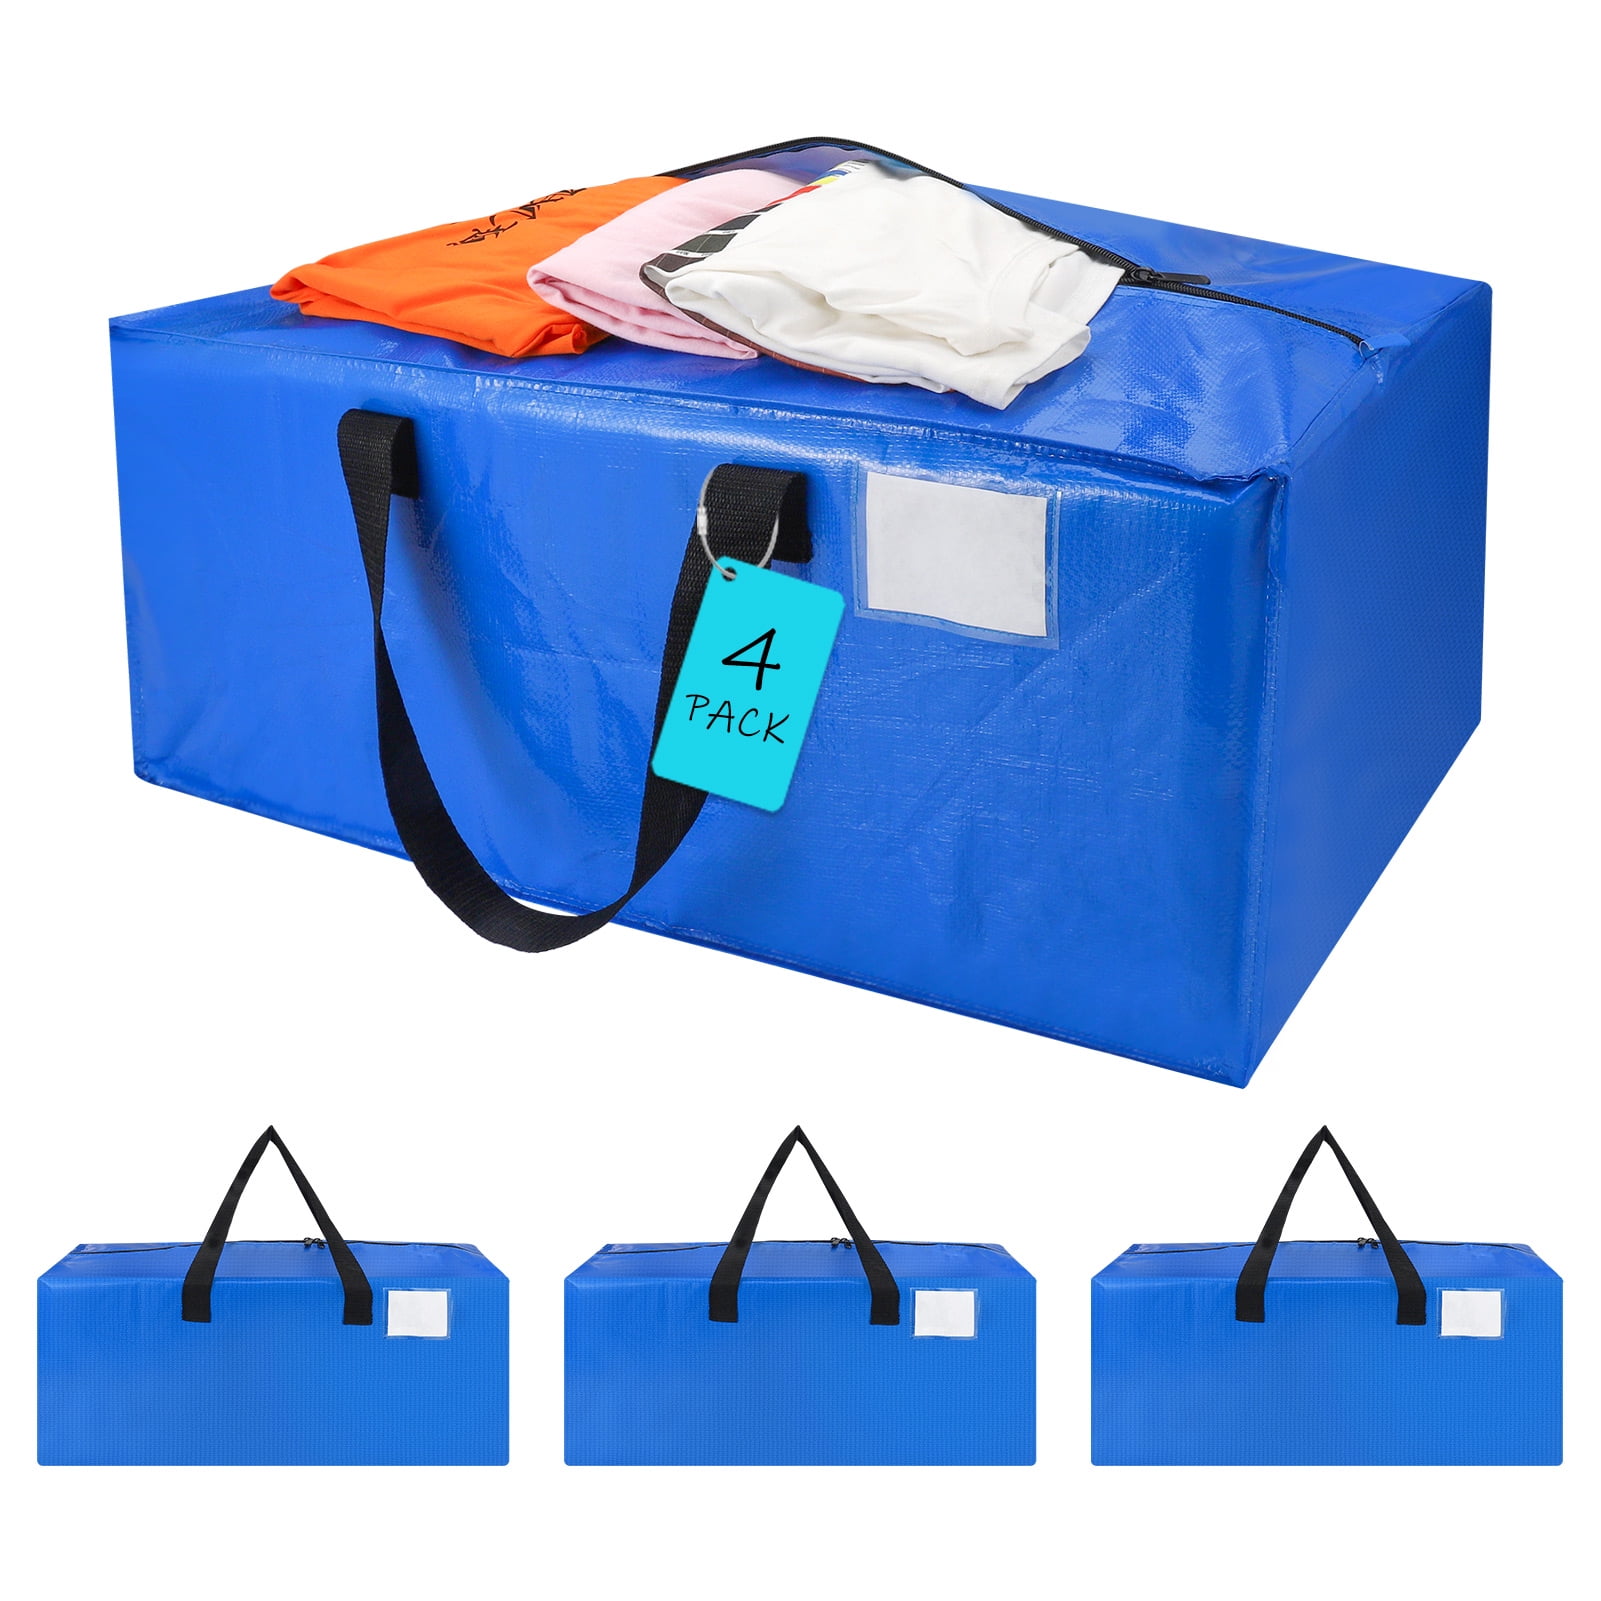 The Acnusik Moving Bags Are on Sale at